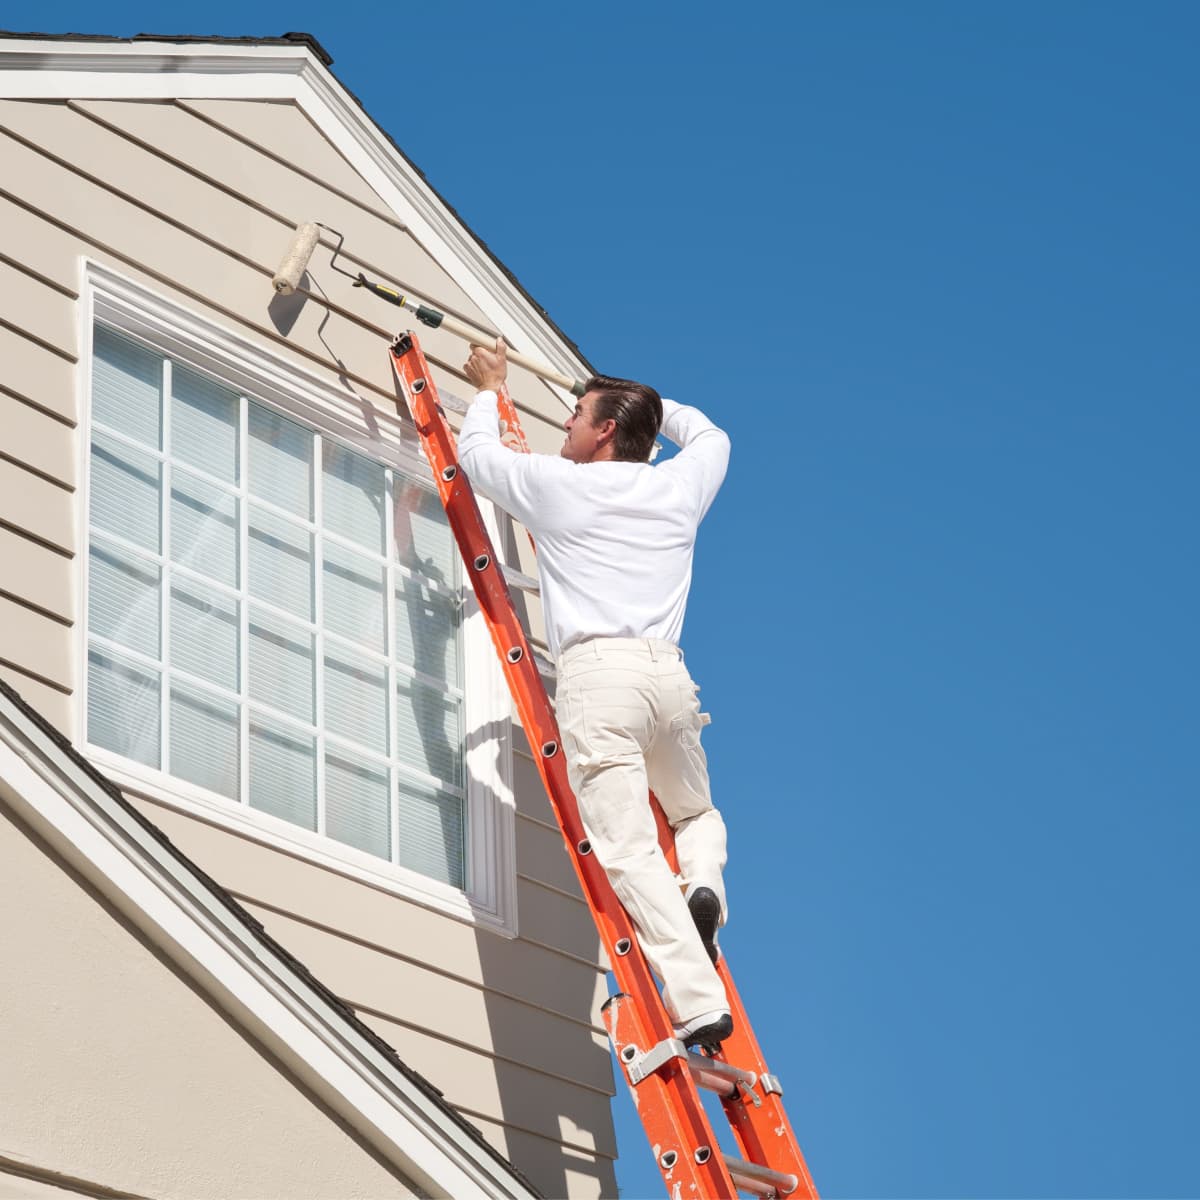 5 Tips for Choosing the Right House Painter for You